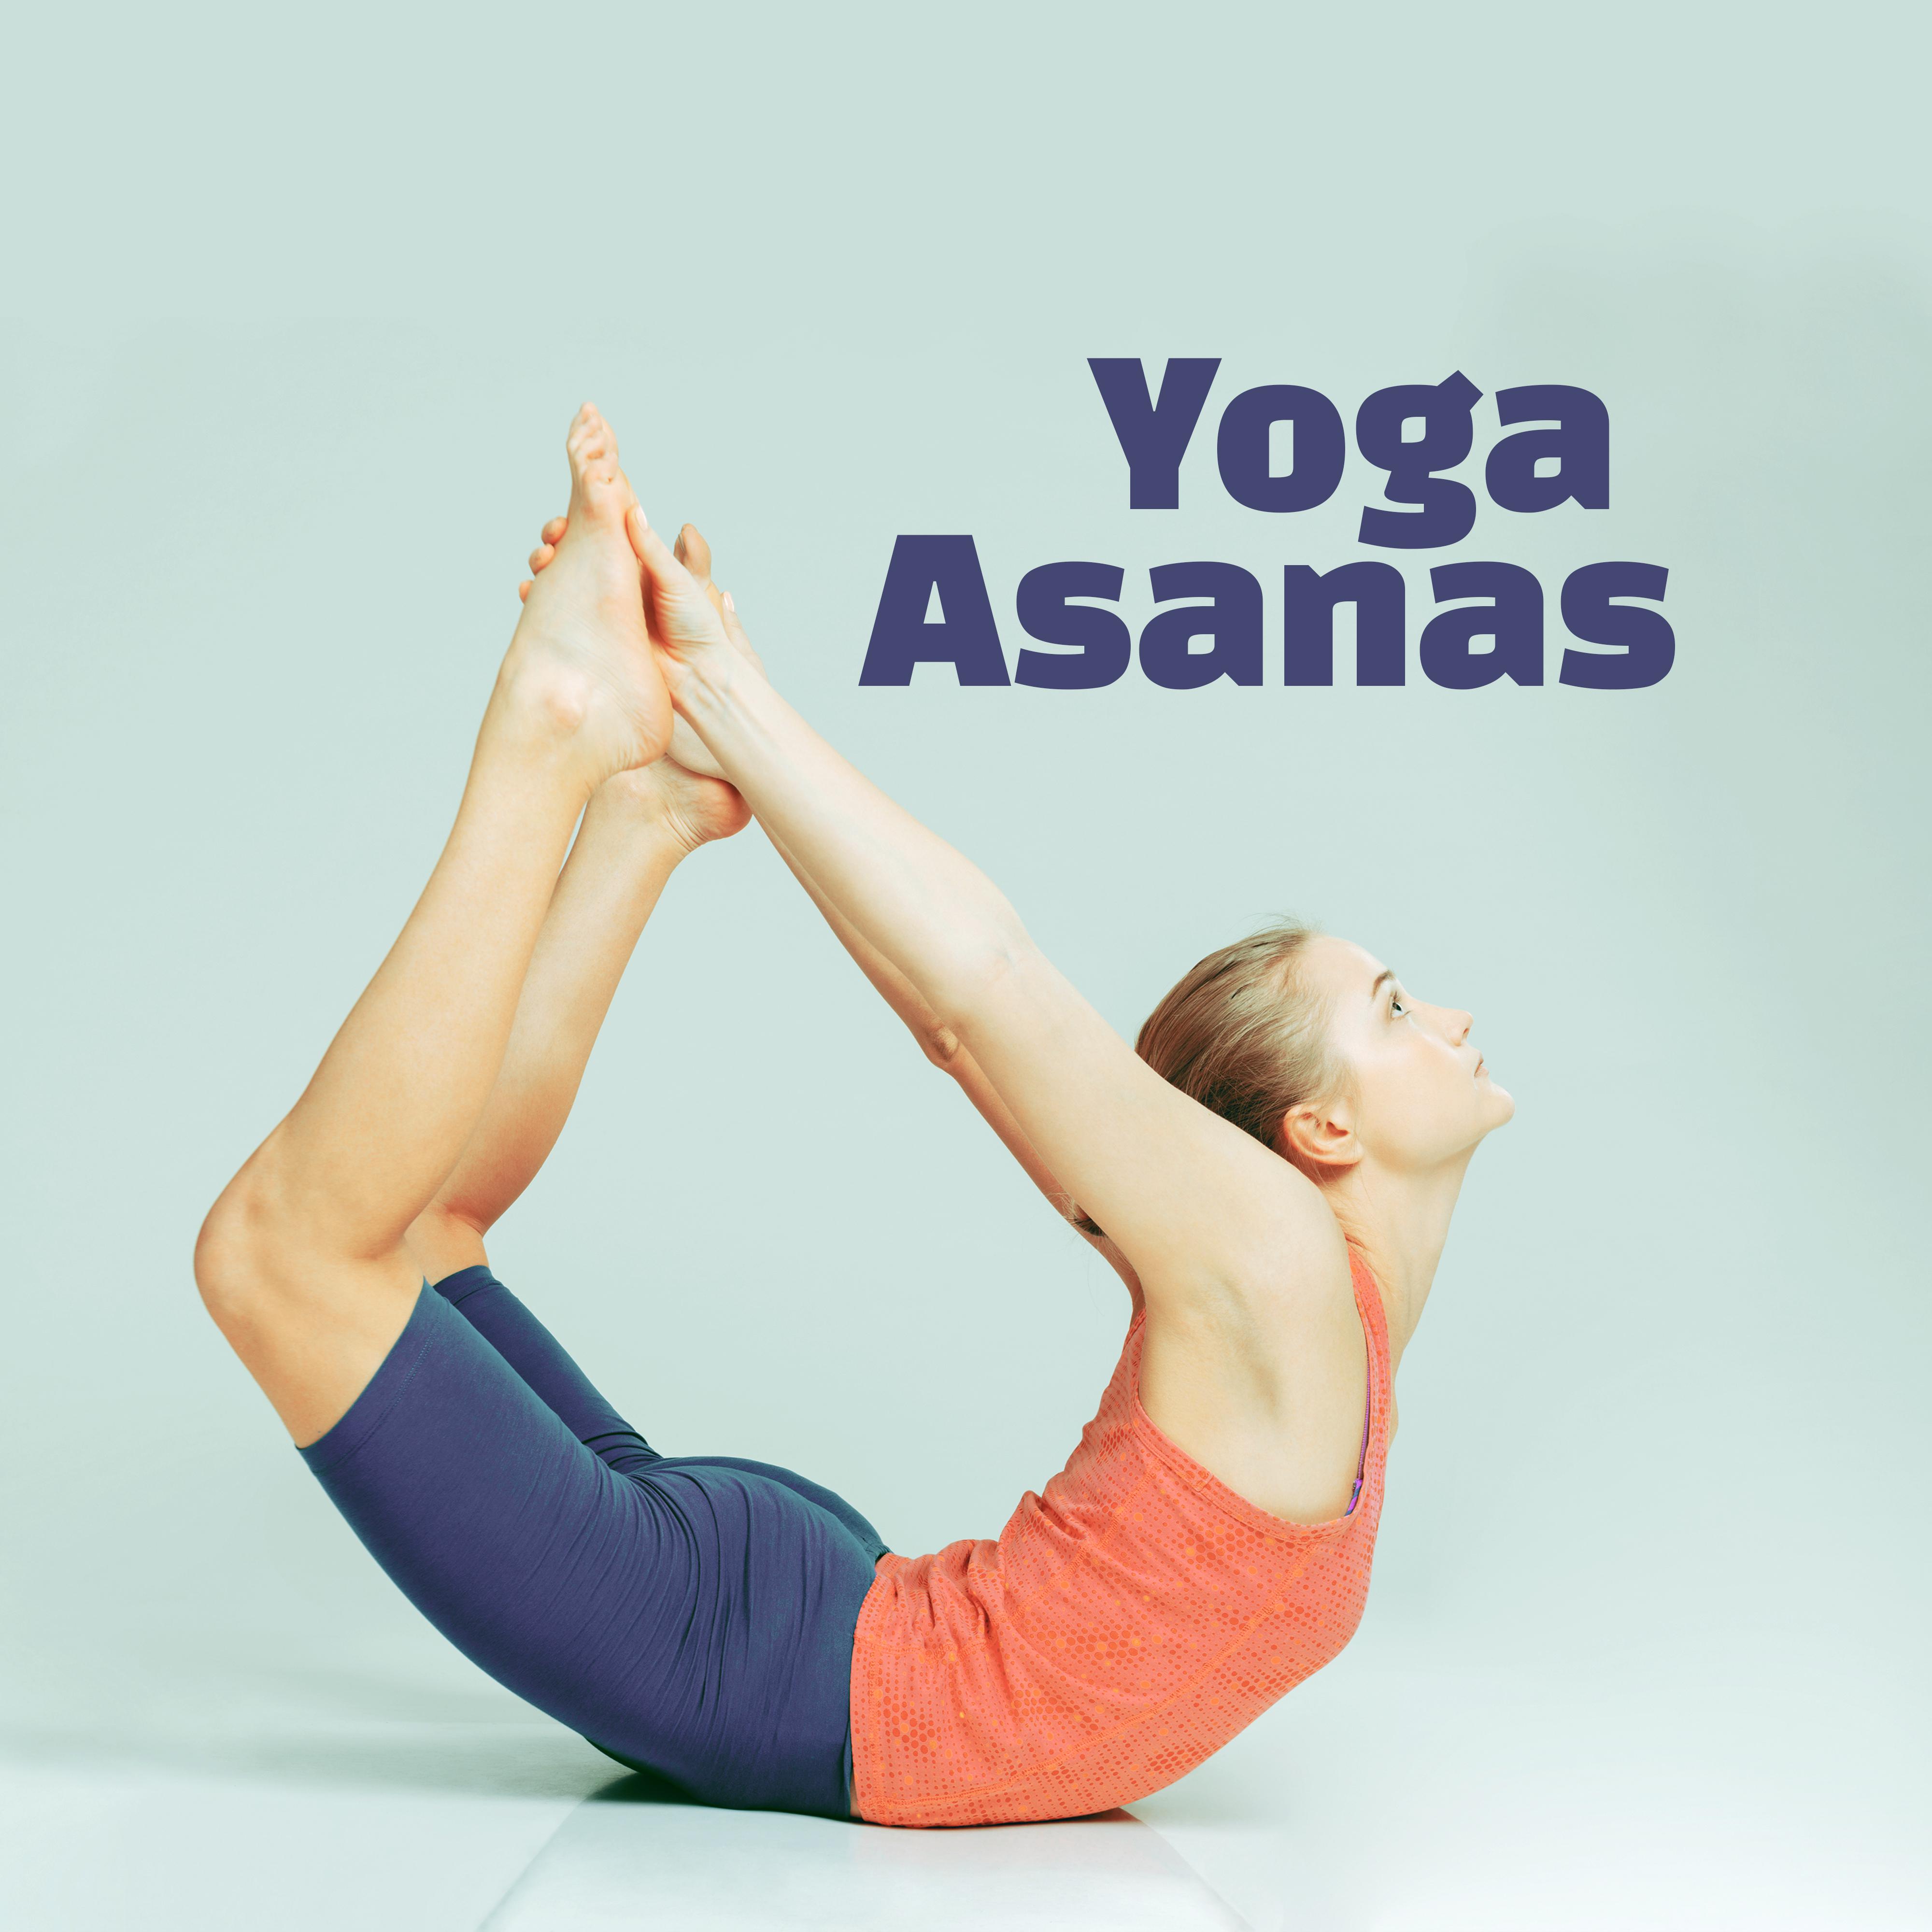 Yoga Asanas – Music for Yoga Practice, Meditation Background Music, New Age Sounds, Healing Sounds